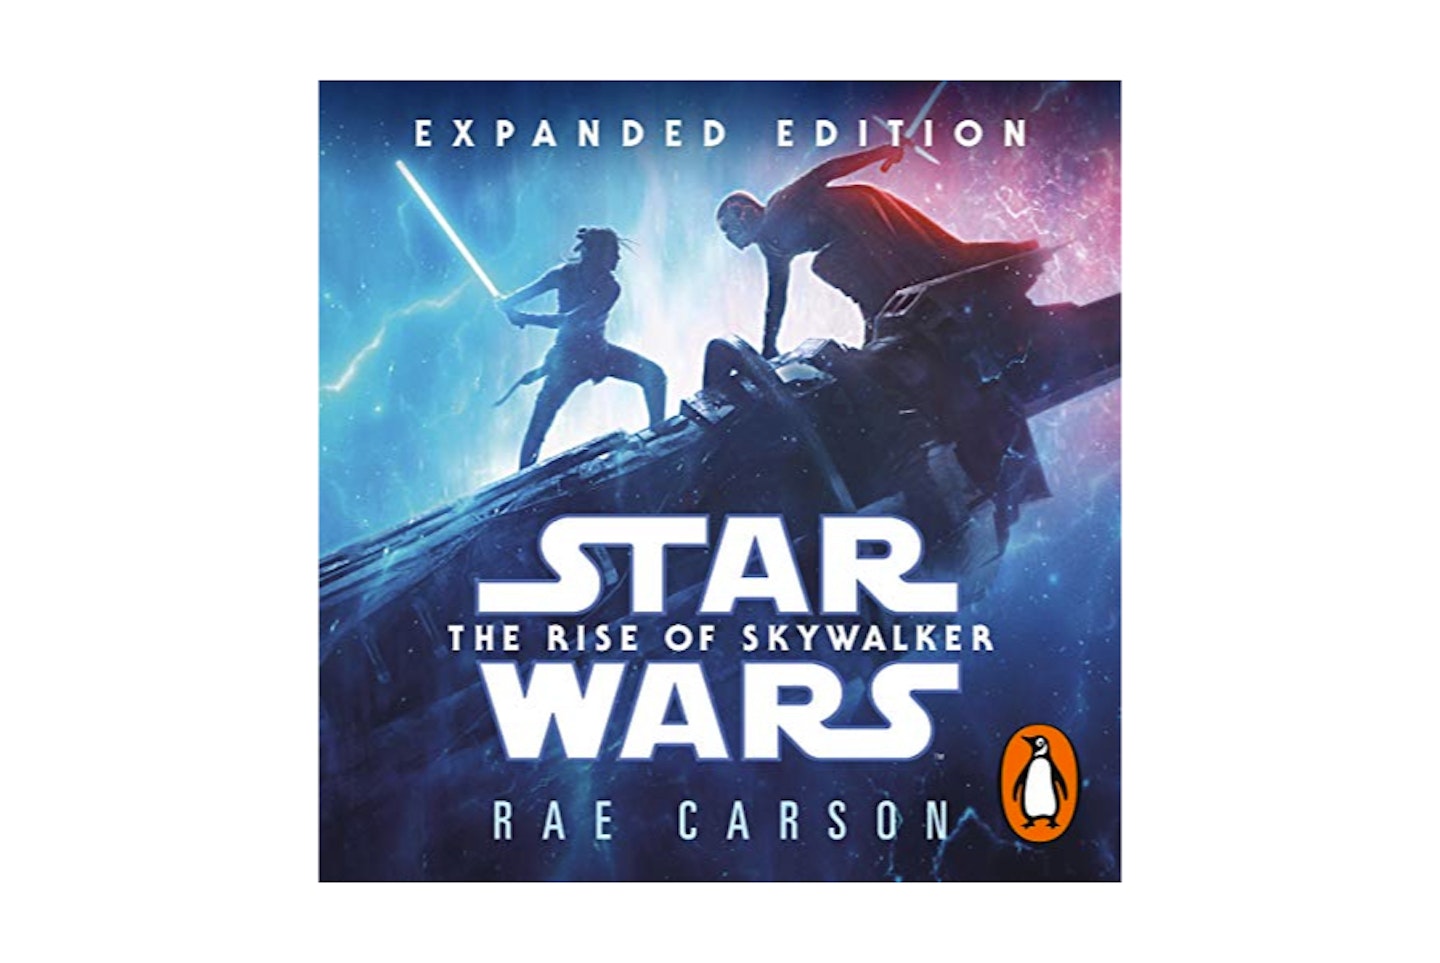 Star Wars: Rise Of Skywalker (Expanded Edition) by Rae Carson